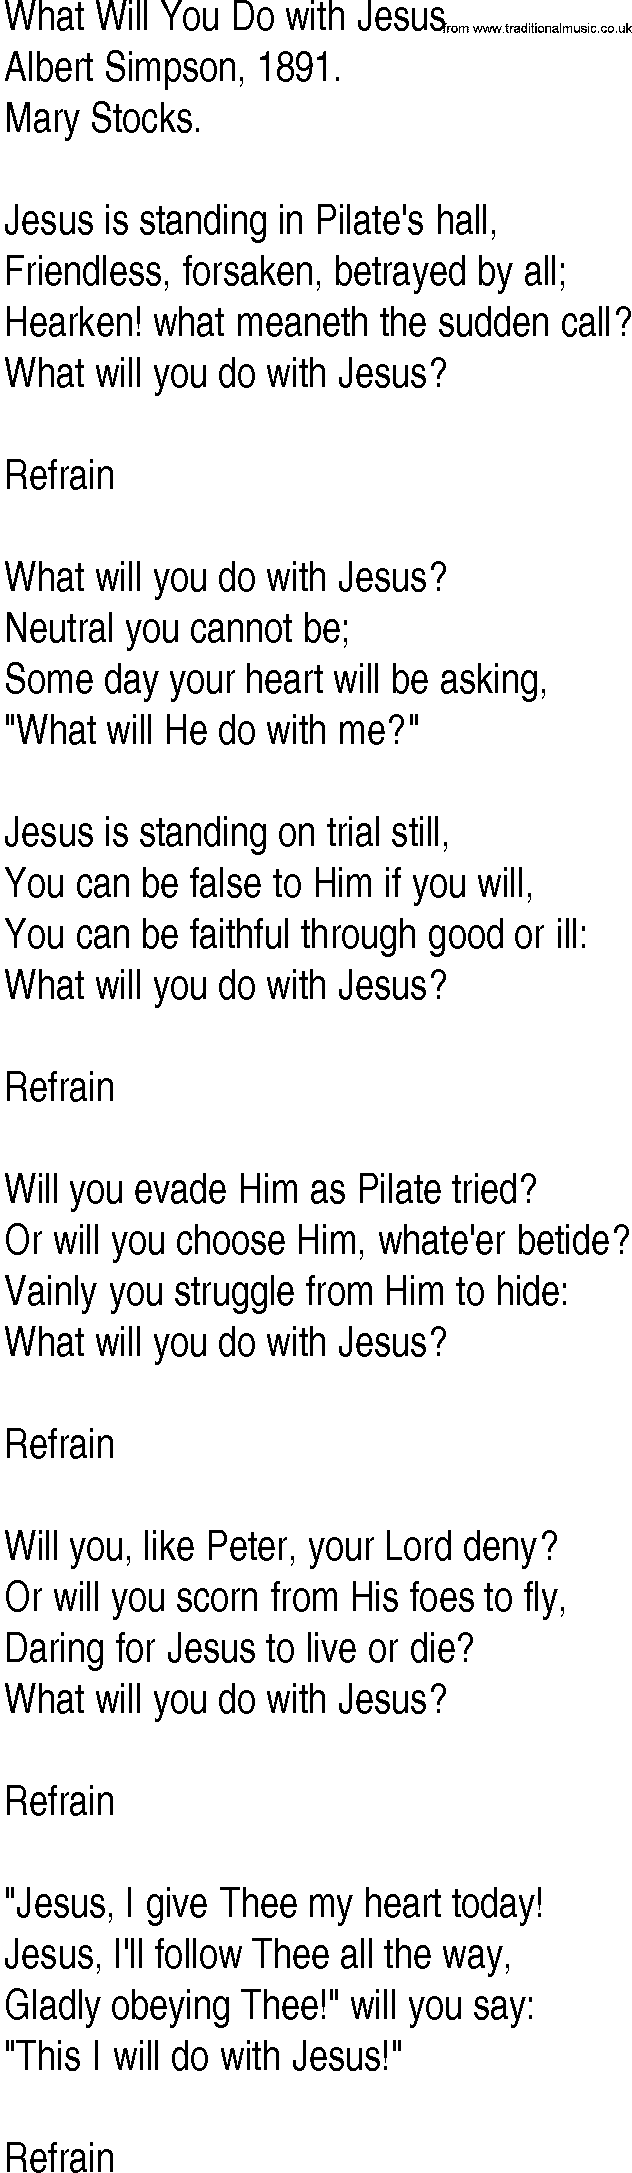 Hymn and Gospel Song: What Will You Do with Jesus by Albert Simpson lyrics